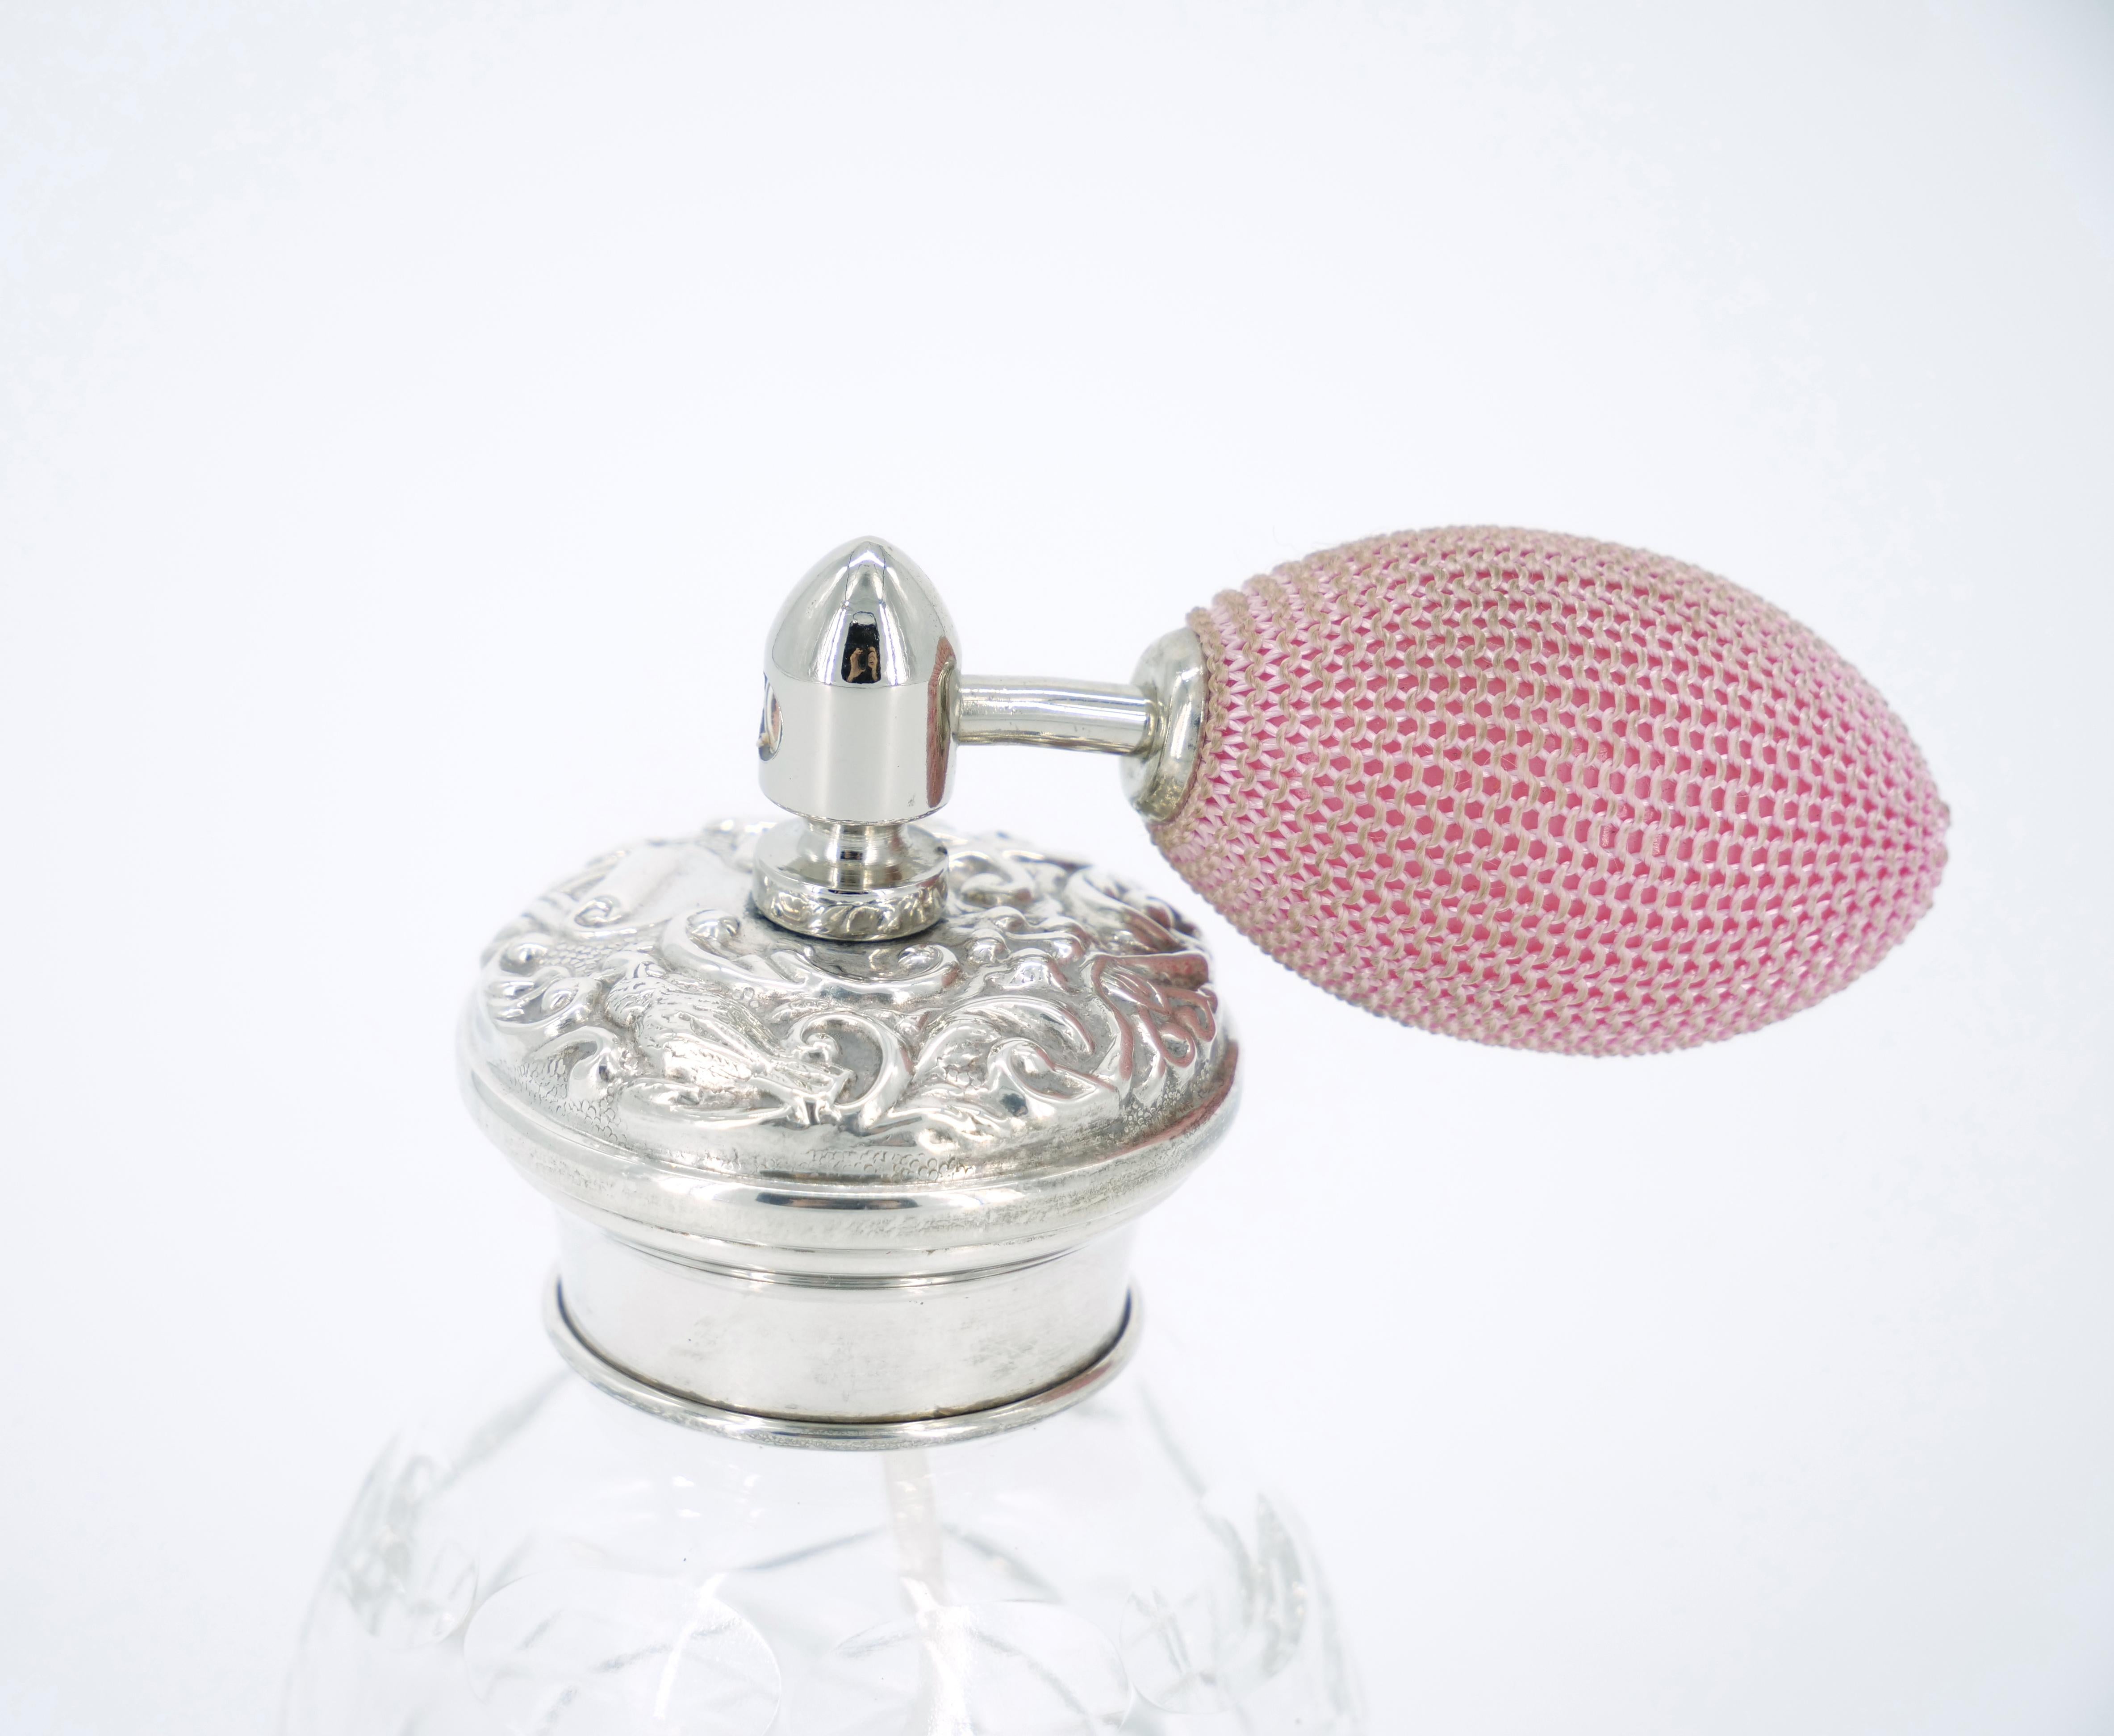 perfume bottle with puff